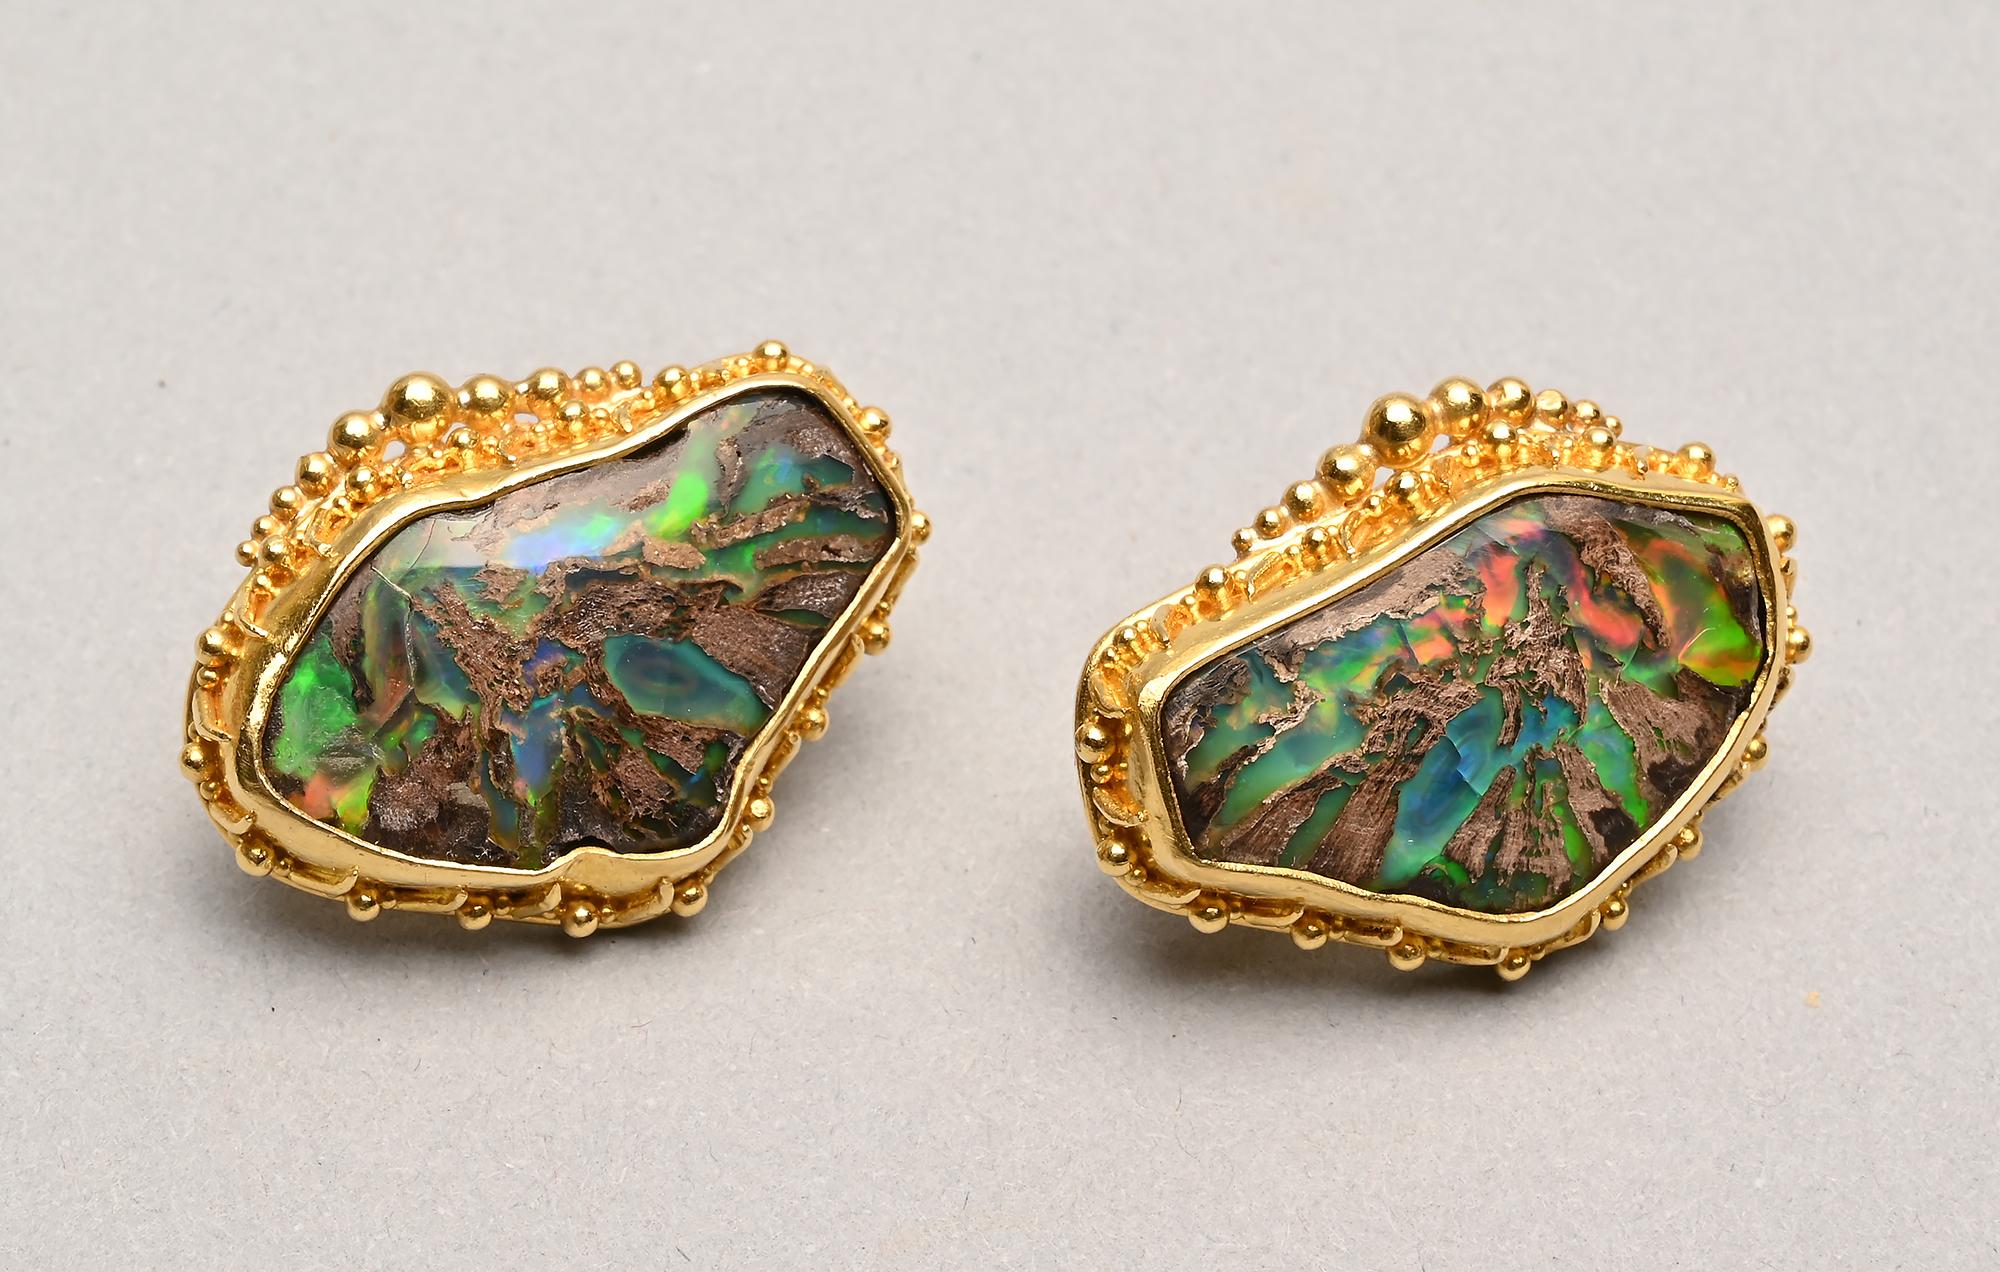 Stunning and unusual earrings by American designer, Luna Felix.  The stones are conk wood which is an opal formed in ancient wood cavities. The only place in the world in which they are found is in the Virgin Valley of Nevada.
The bezels surrounding